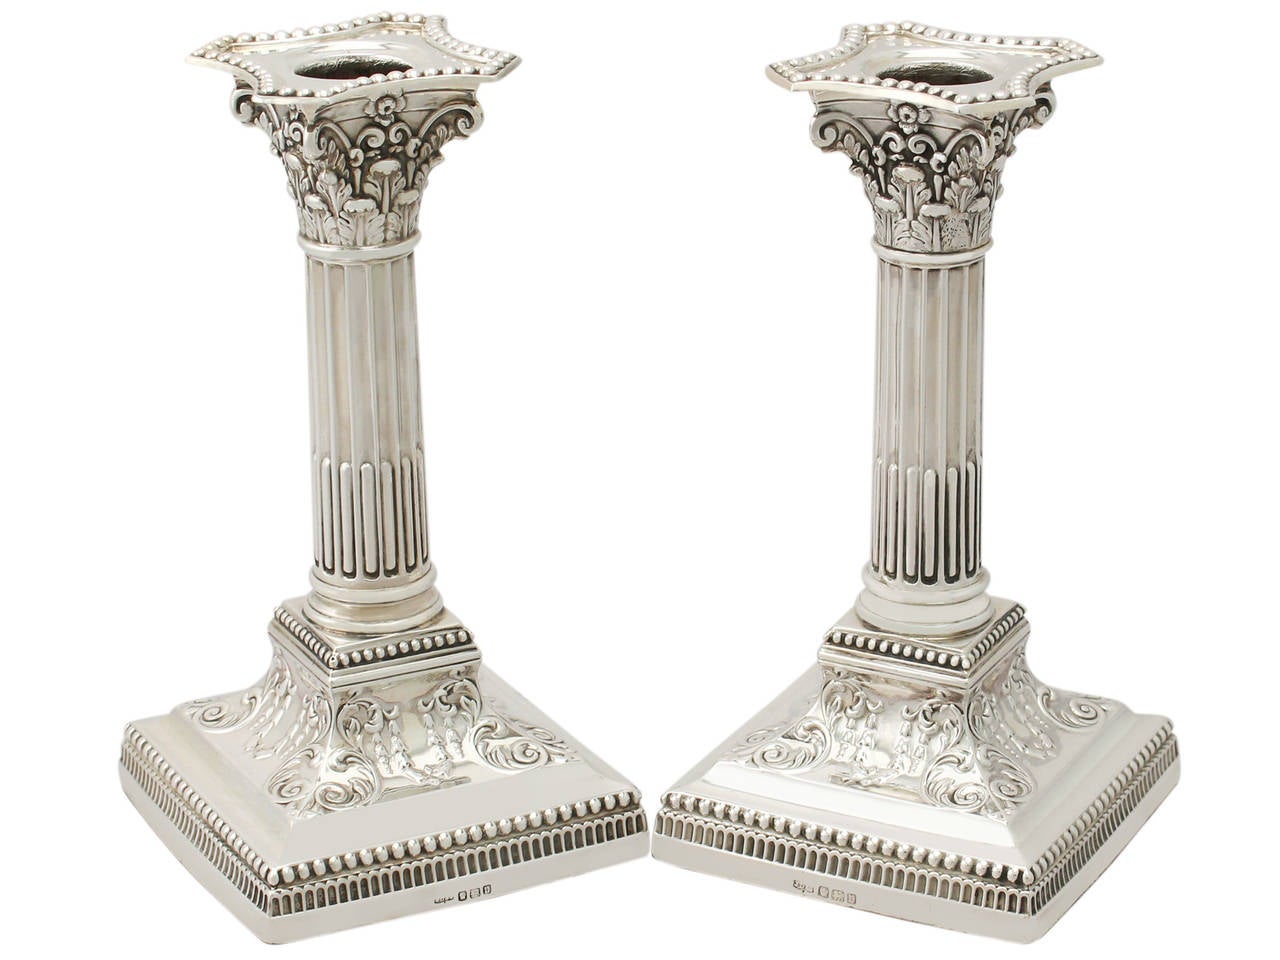 A fine and impressive pair of antique George V English sterling silver Corinthian column candlesticks; part of our ornamental silverware collection.

These fine antique George V sterling silver candlesticks have Corinthian columns to a square